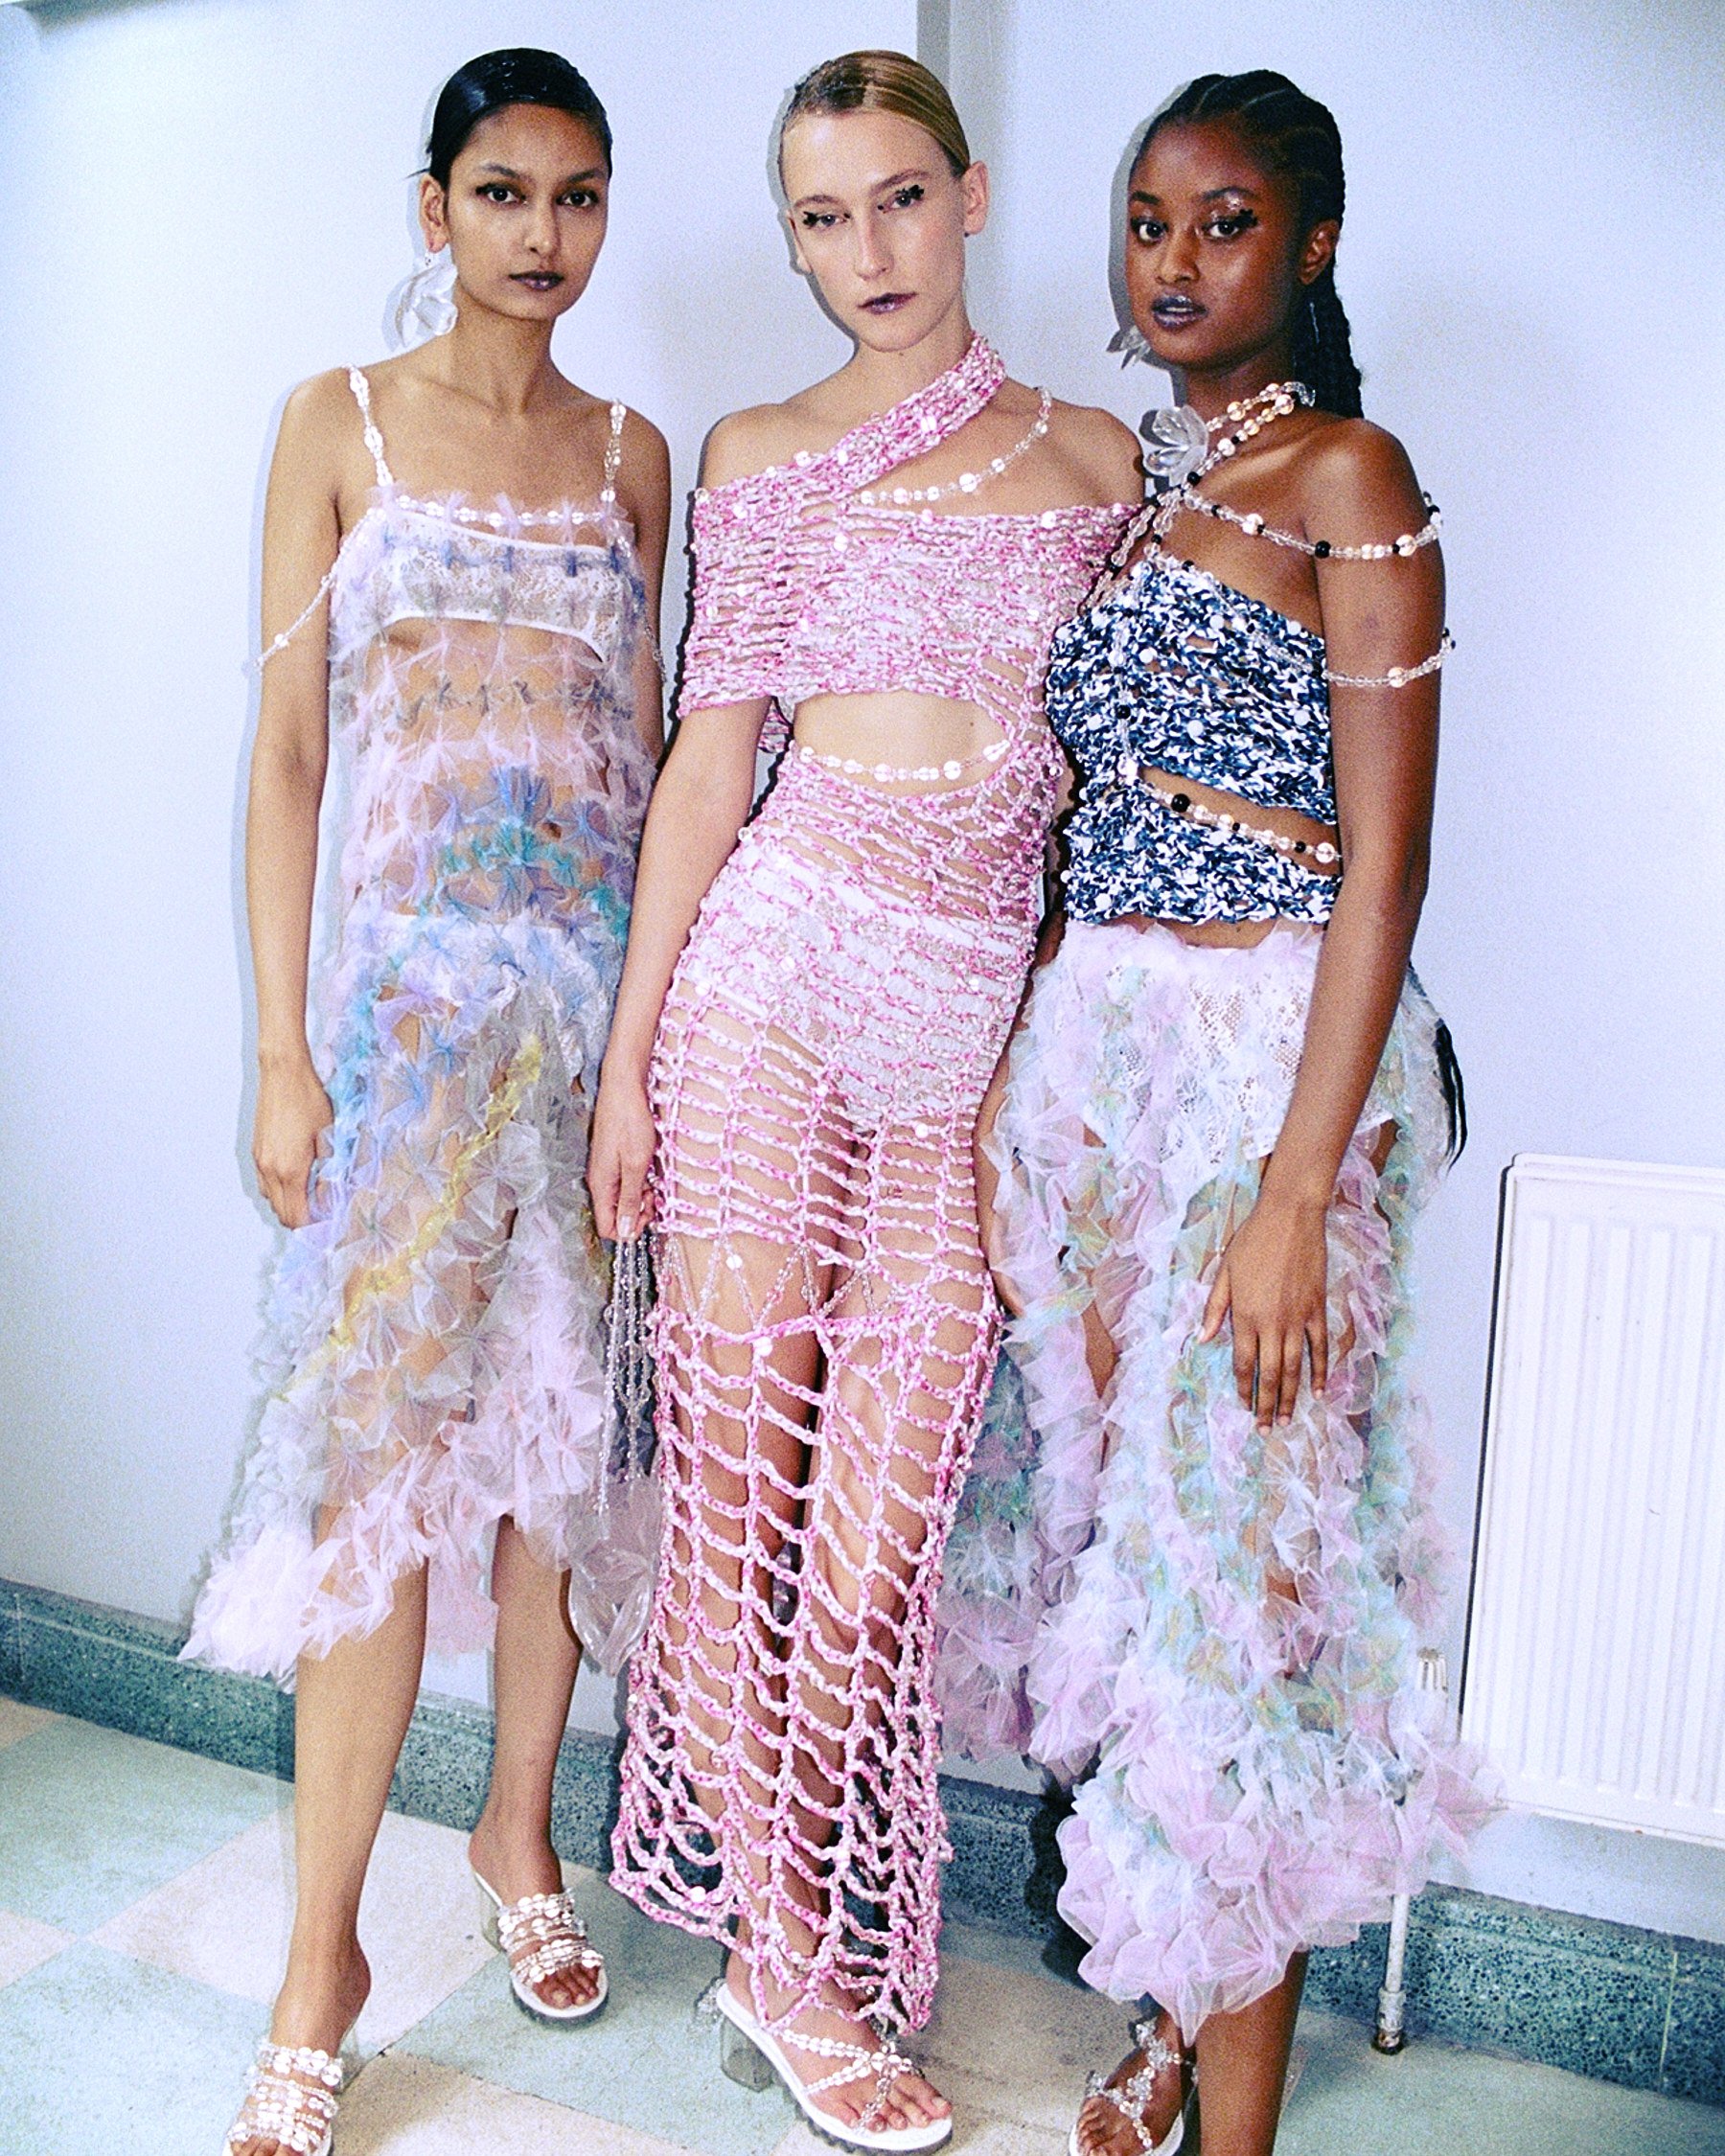 Looks from Chinese fashion designer Susan Fang’s nature-inspired spring/summer 2023 collection shown at London Fashion Week.